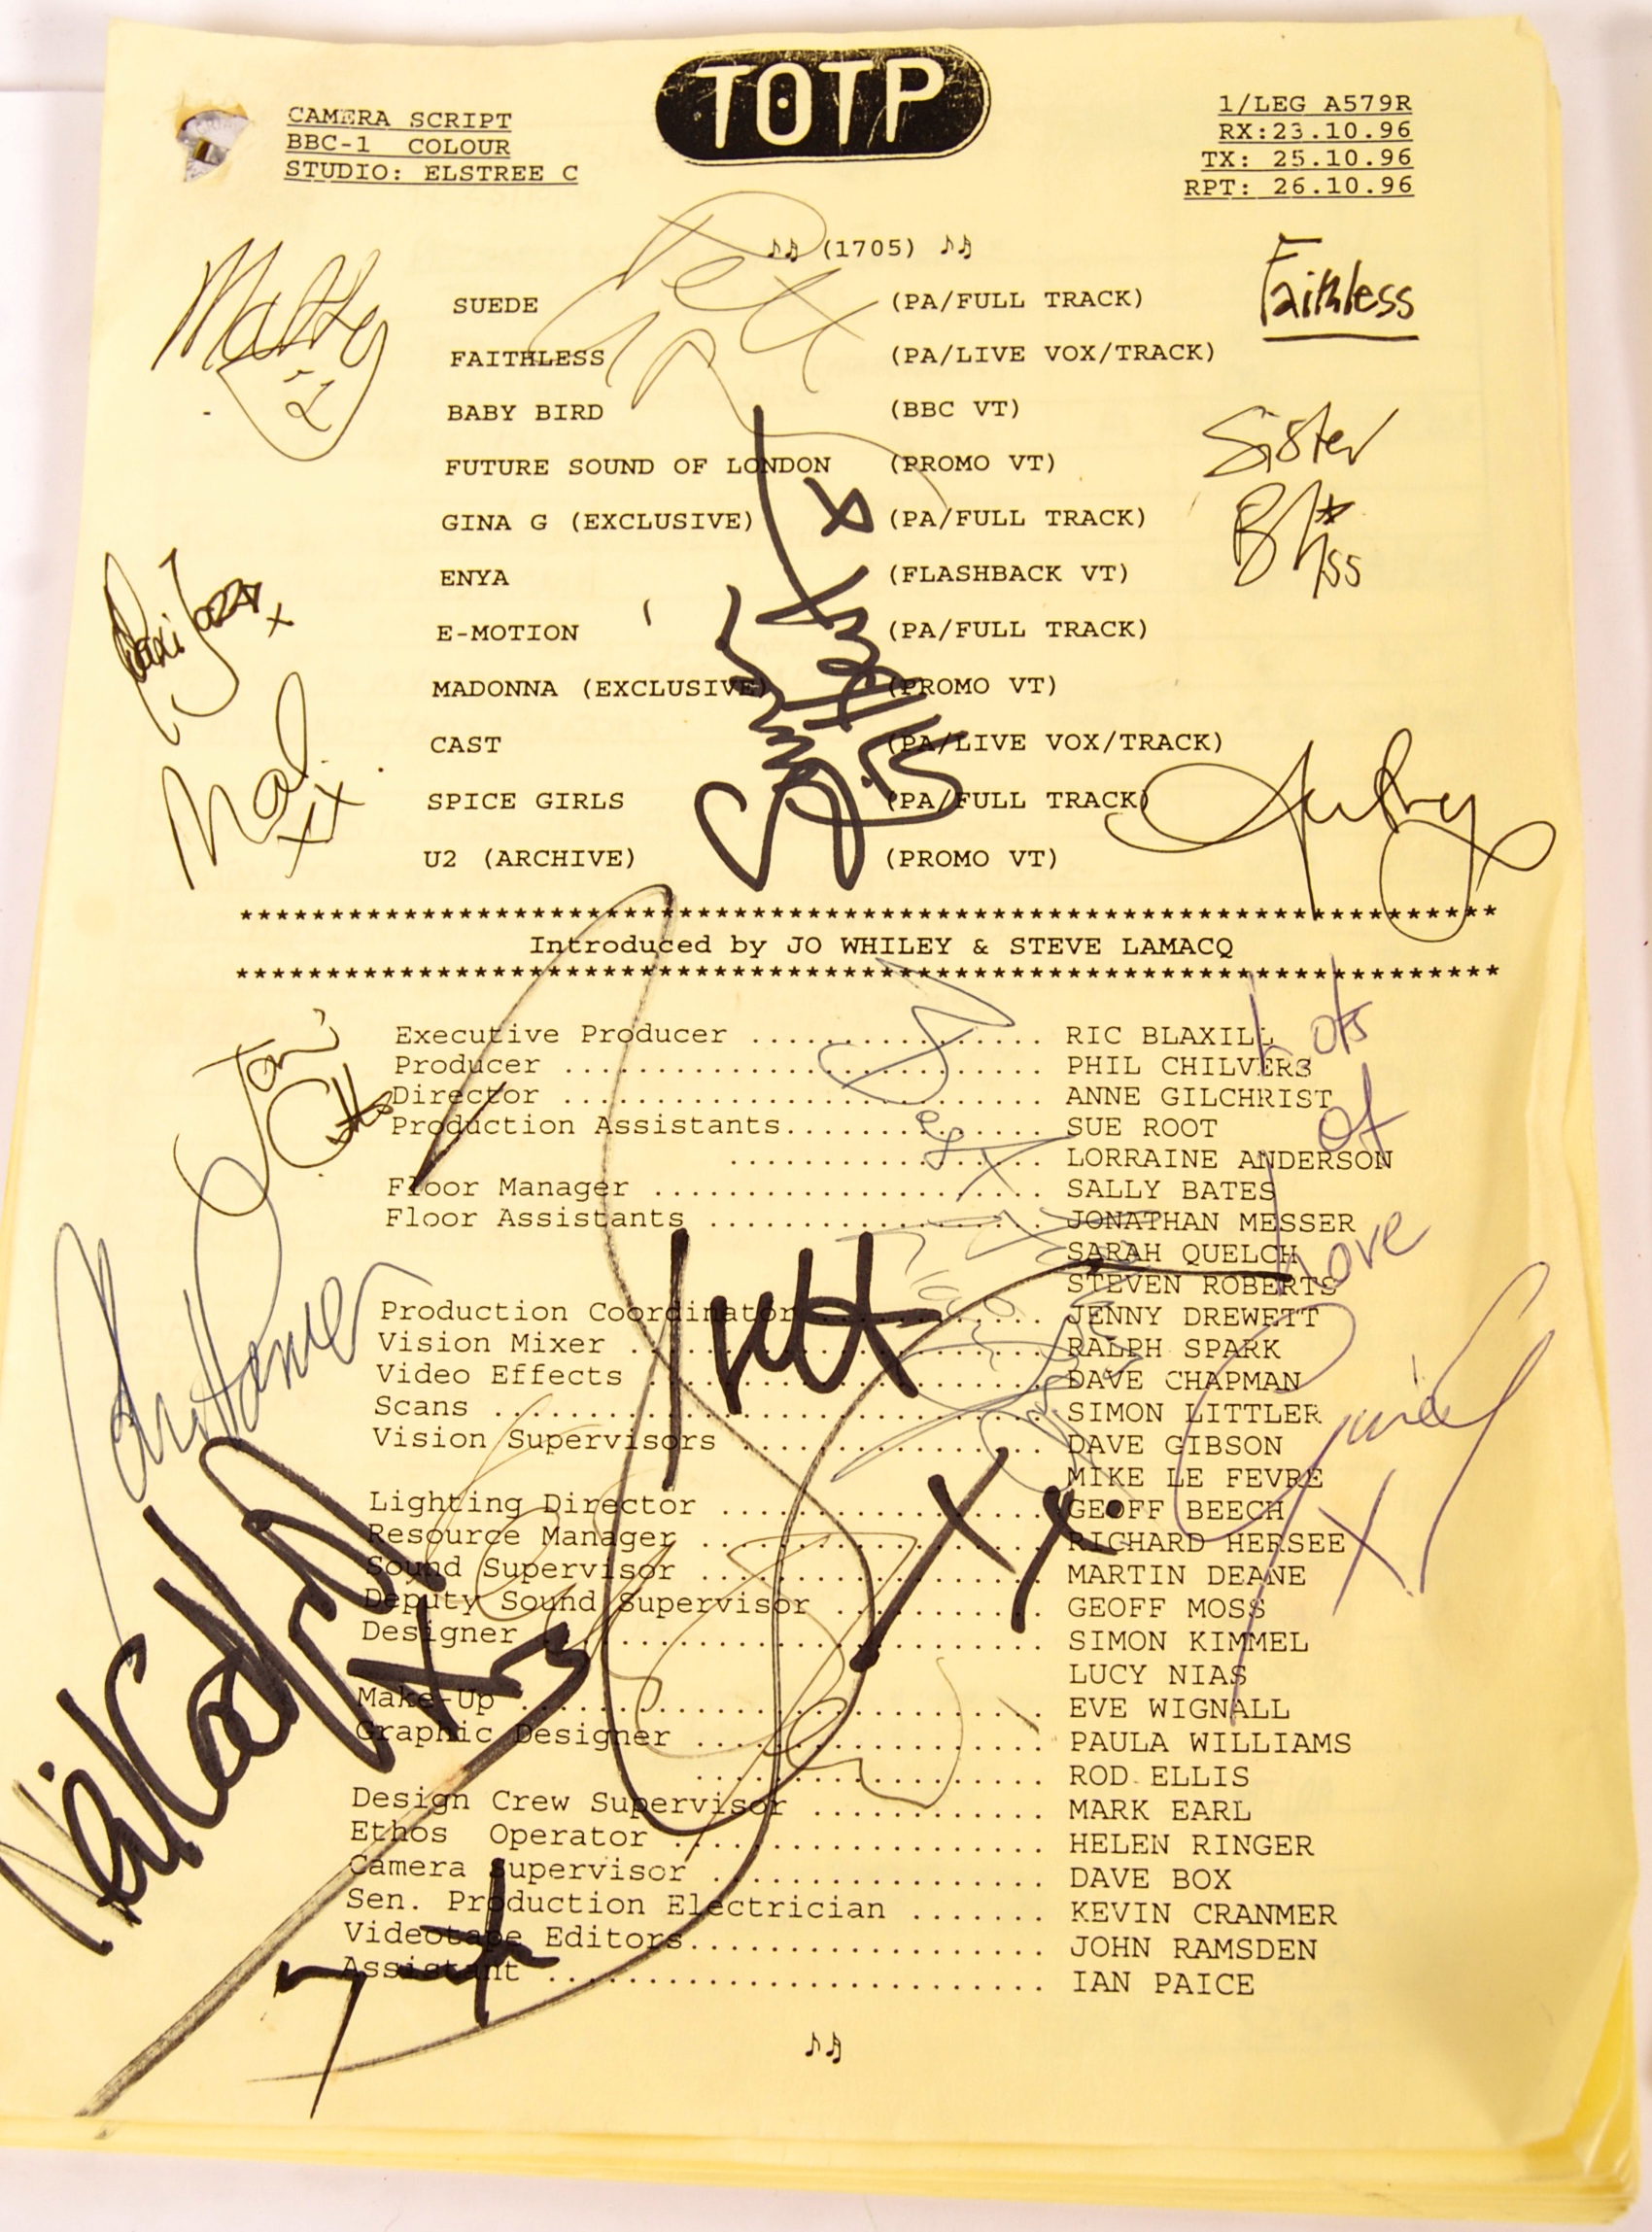 RARE TOP OF THE POPS CHILDREN IN NEED AUTOGRAPHED SCRIPTS - Image 2 of 5